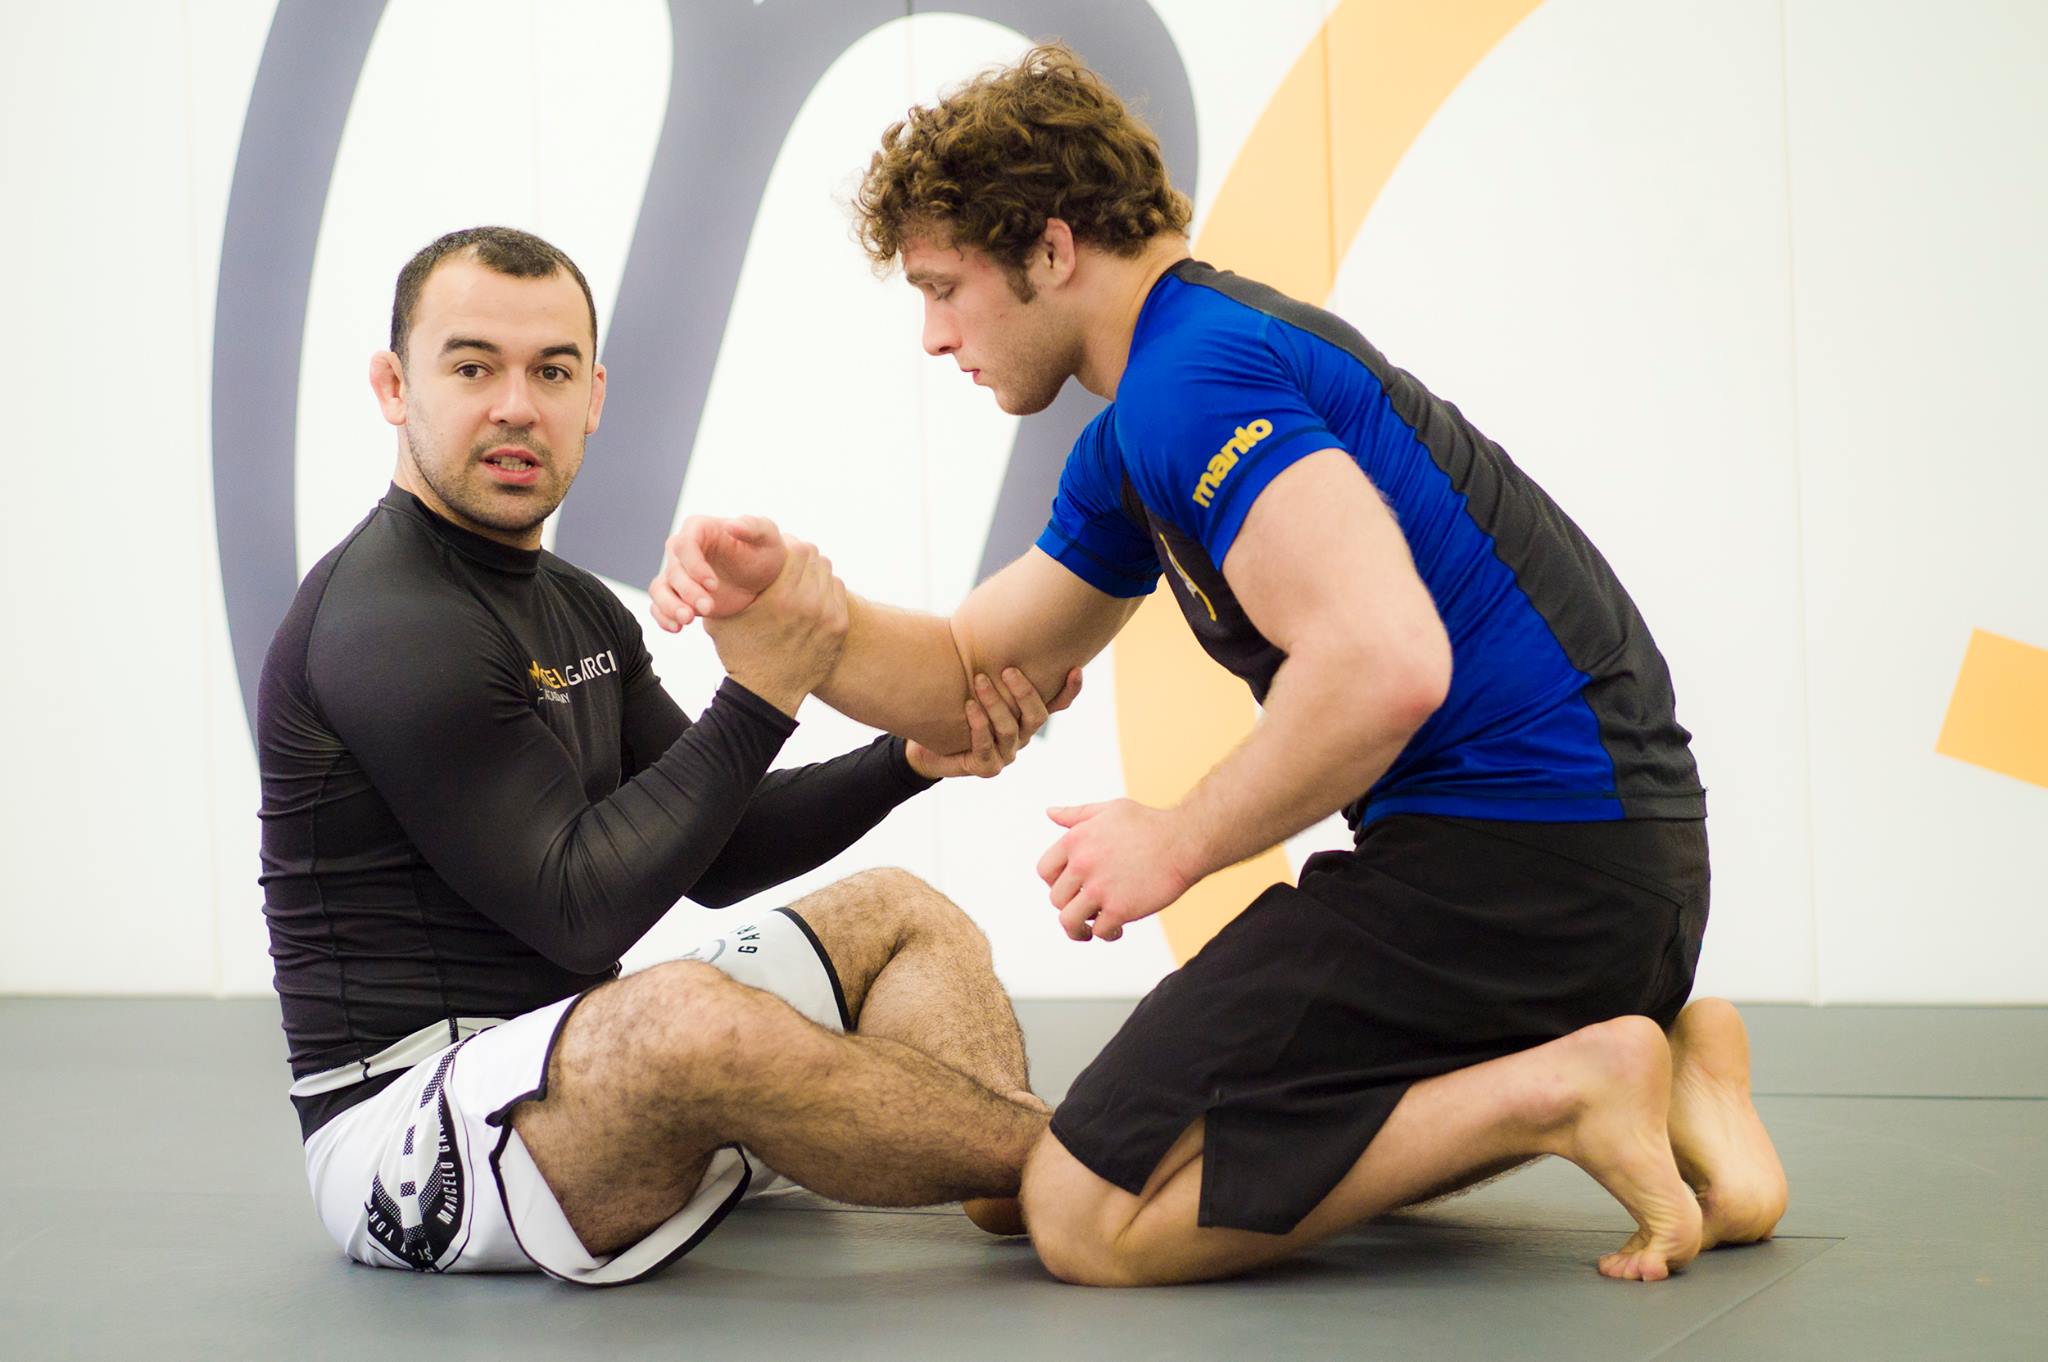 Jon Satava: ‘Being Called The American Marcelo Garcia is an Honor’